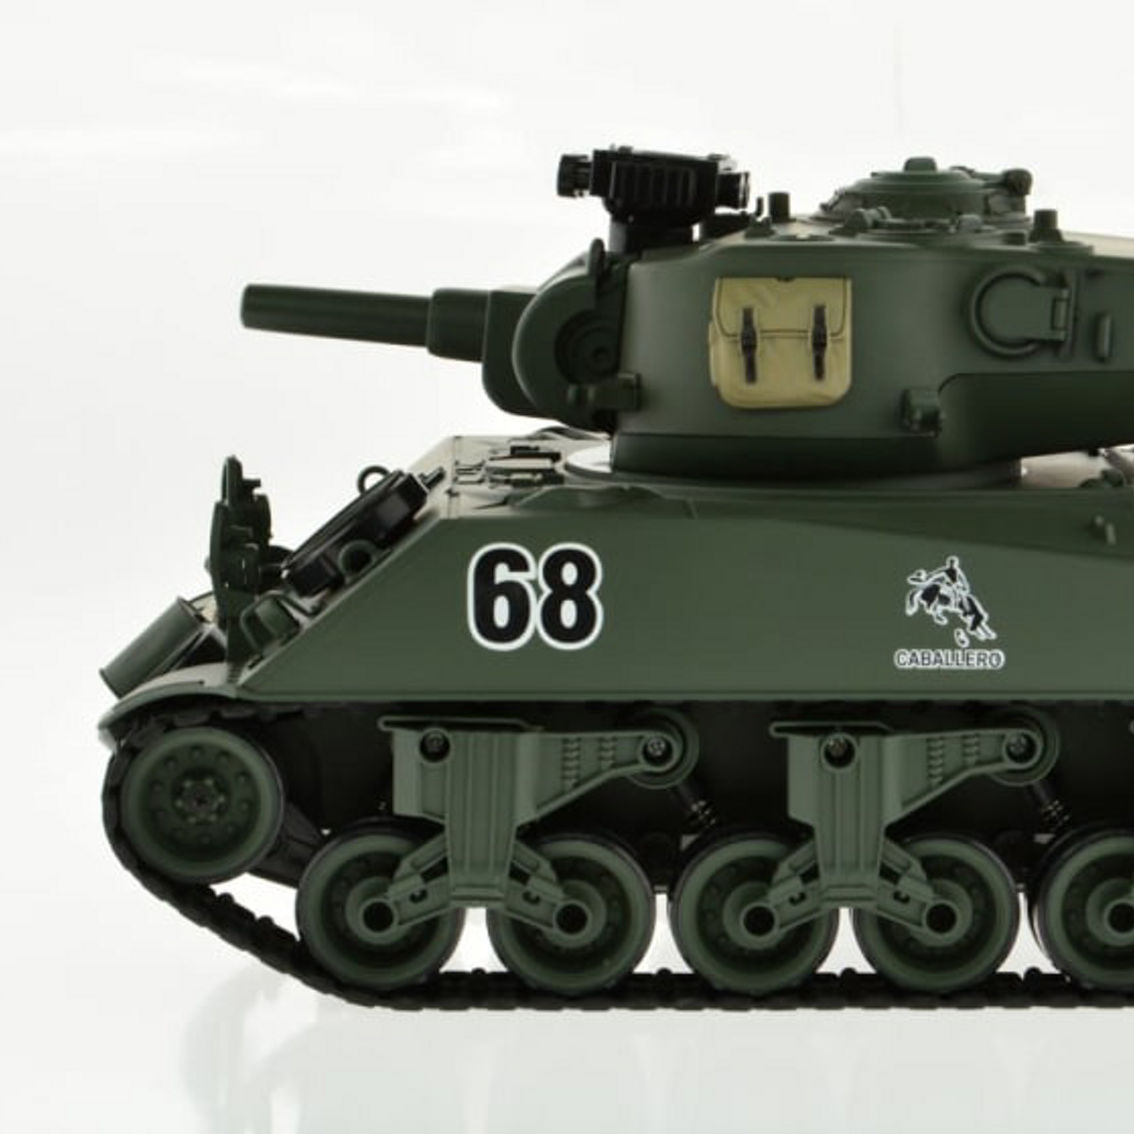 CIS-YZ-828 1:18 scale WWII USA Sherman tank with lights sound and BB gun - Image 2 of 5